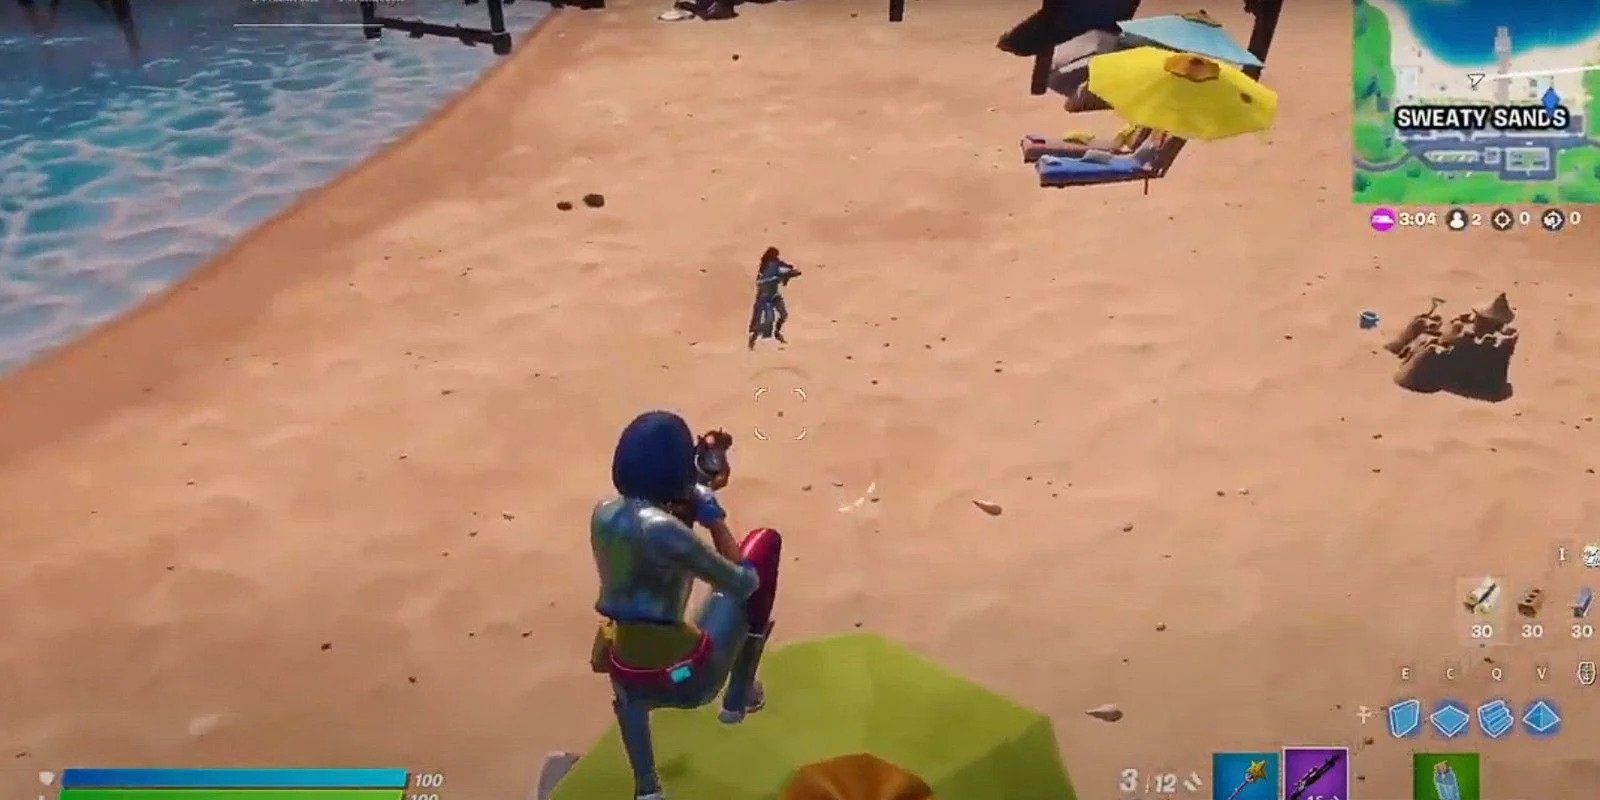 Fortnite Deal Damage Within 10 Seconds of Bouncing Off an Umbrella at Sweaty Sands